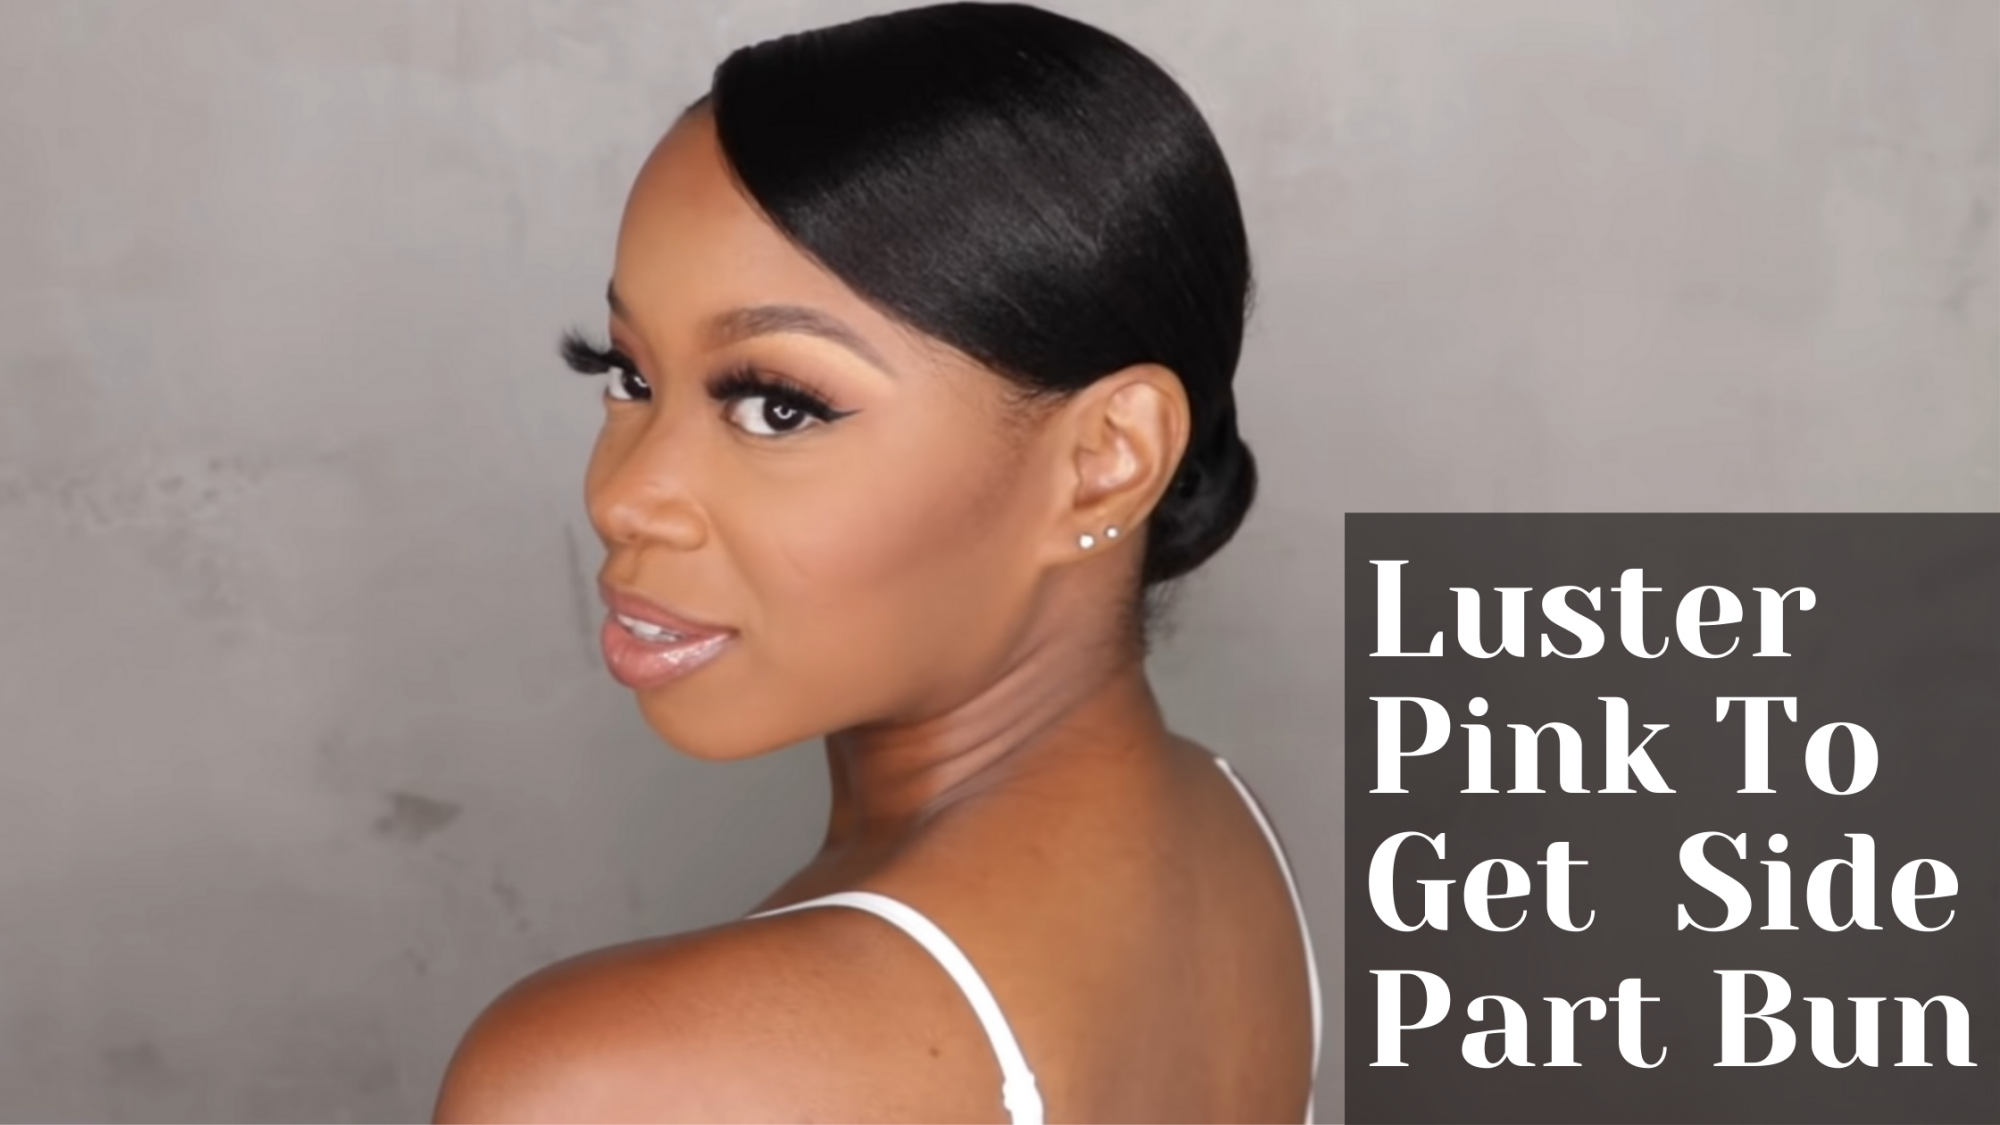 She Used Luster Pink To Get This Beautiful And Moisturized Side Part Bun  Without Molding ⋆ African American Hairstyle Videos - AAHV